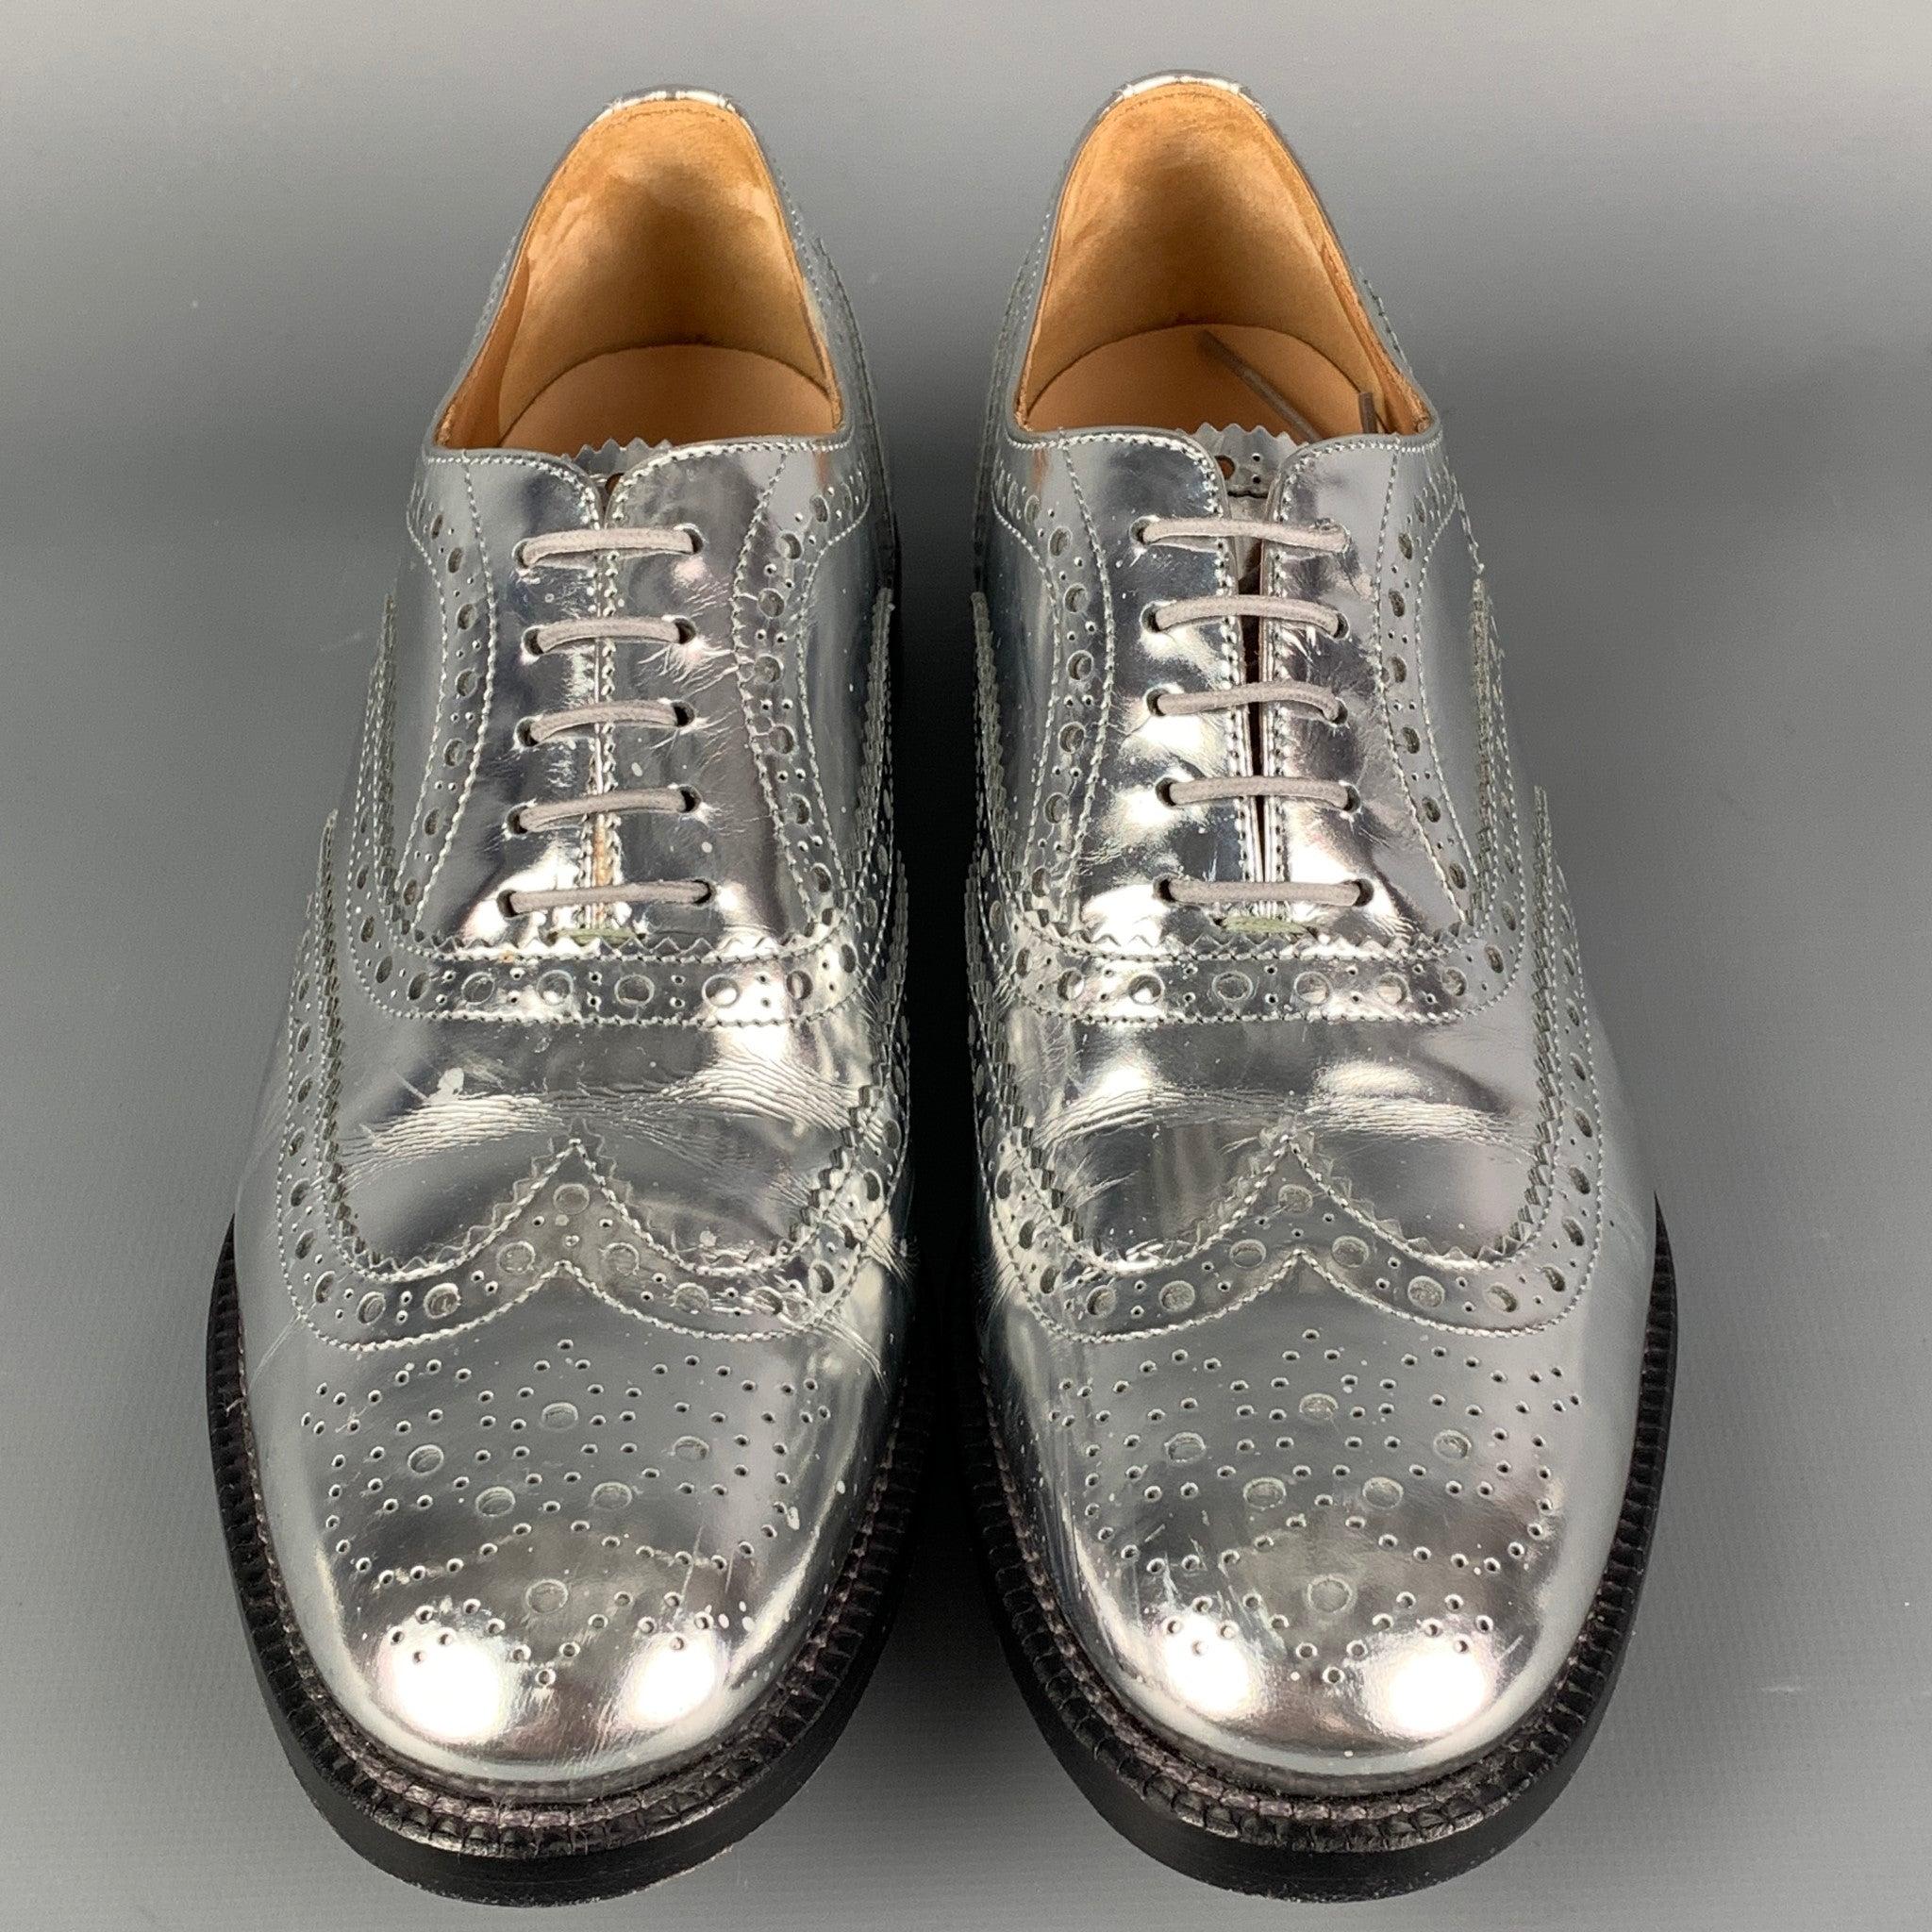 Women's CHURCH'S Size 7.5 Silver Perforated Metallic Leather Wingtip Shoes